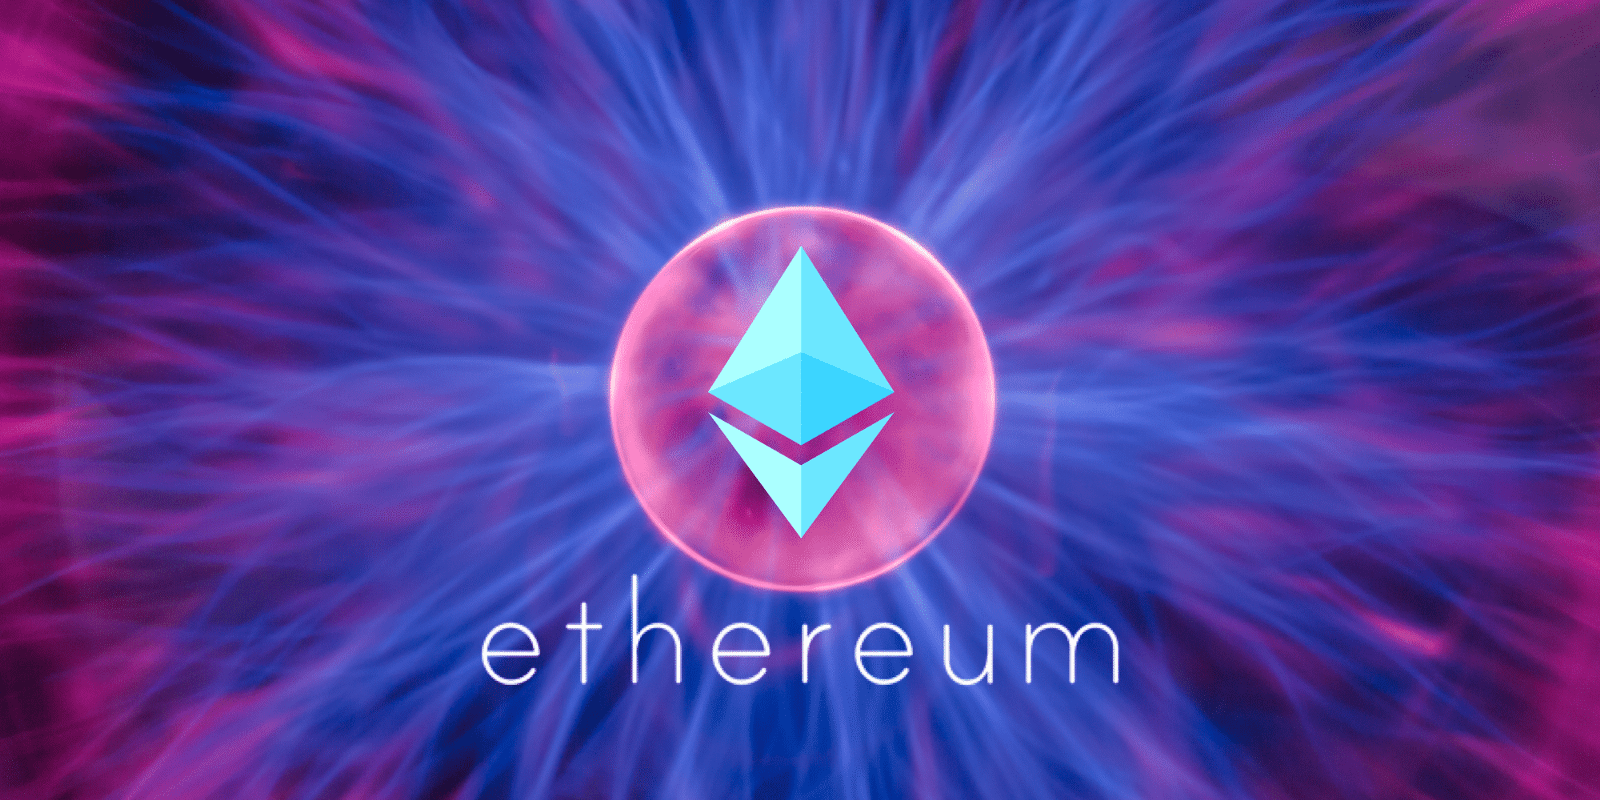 50, Ethereum For $15K: The Profitable Early Investment Of Reddit's Co-founder